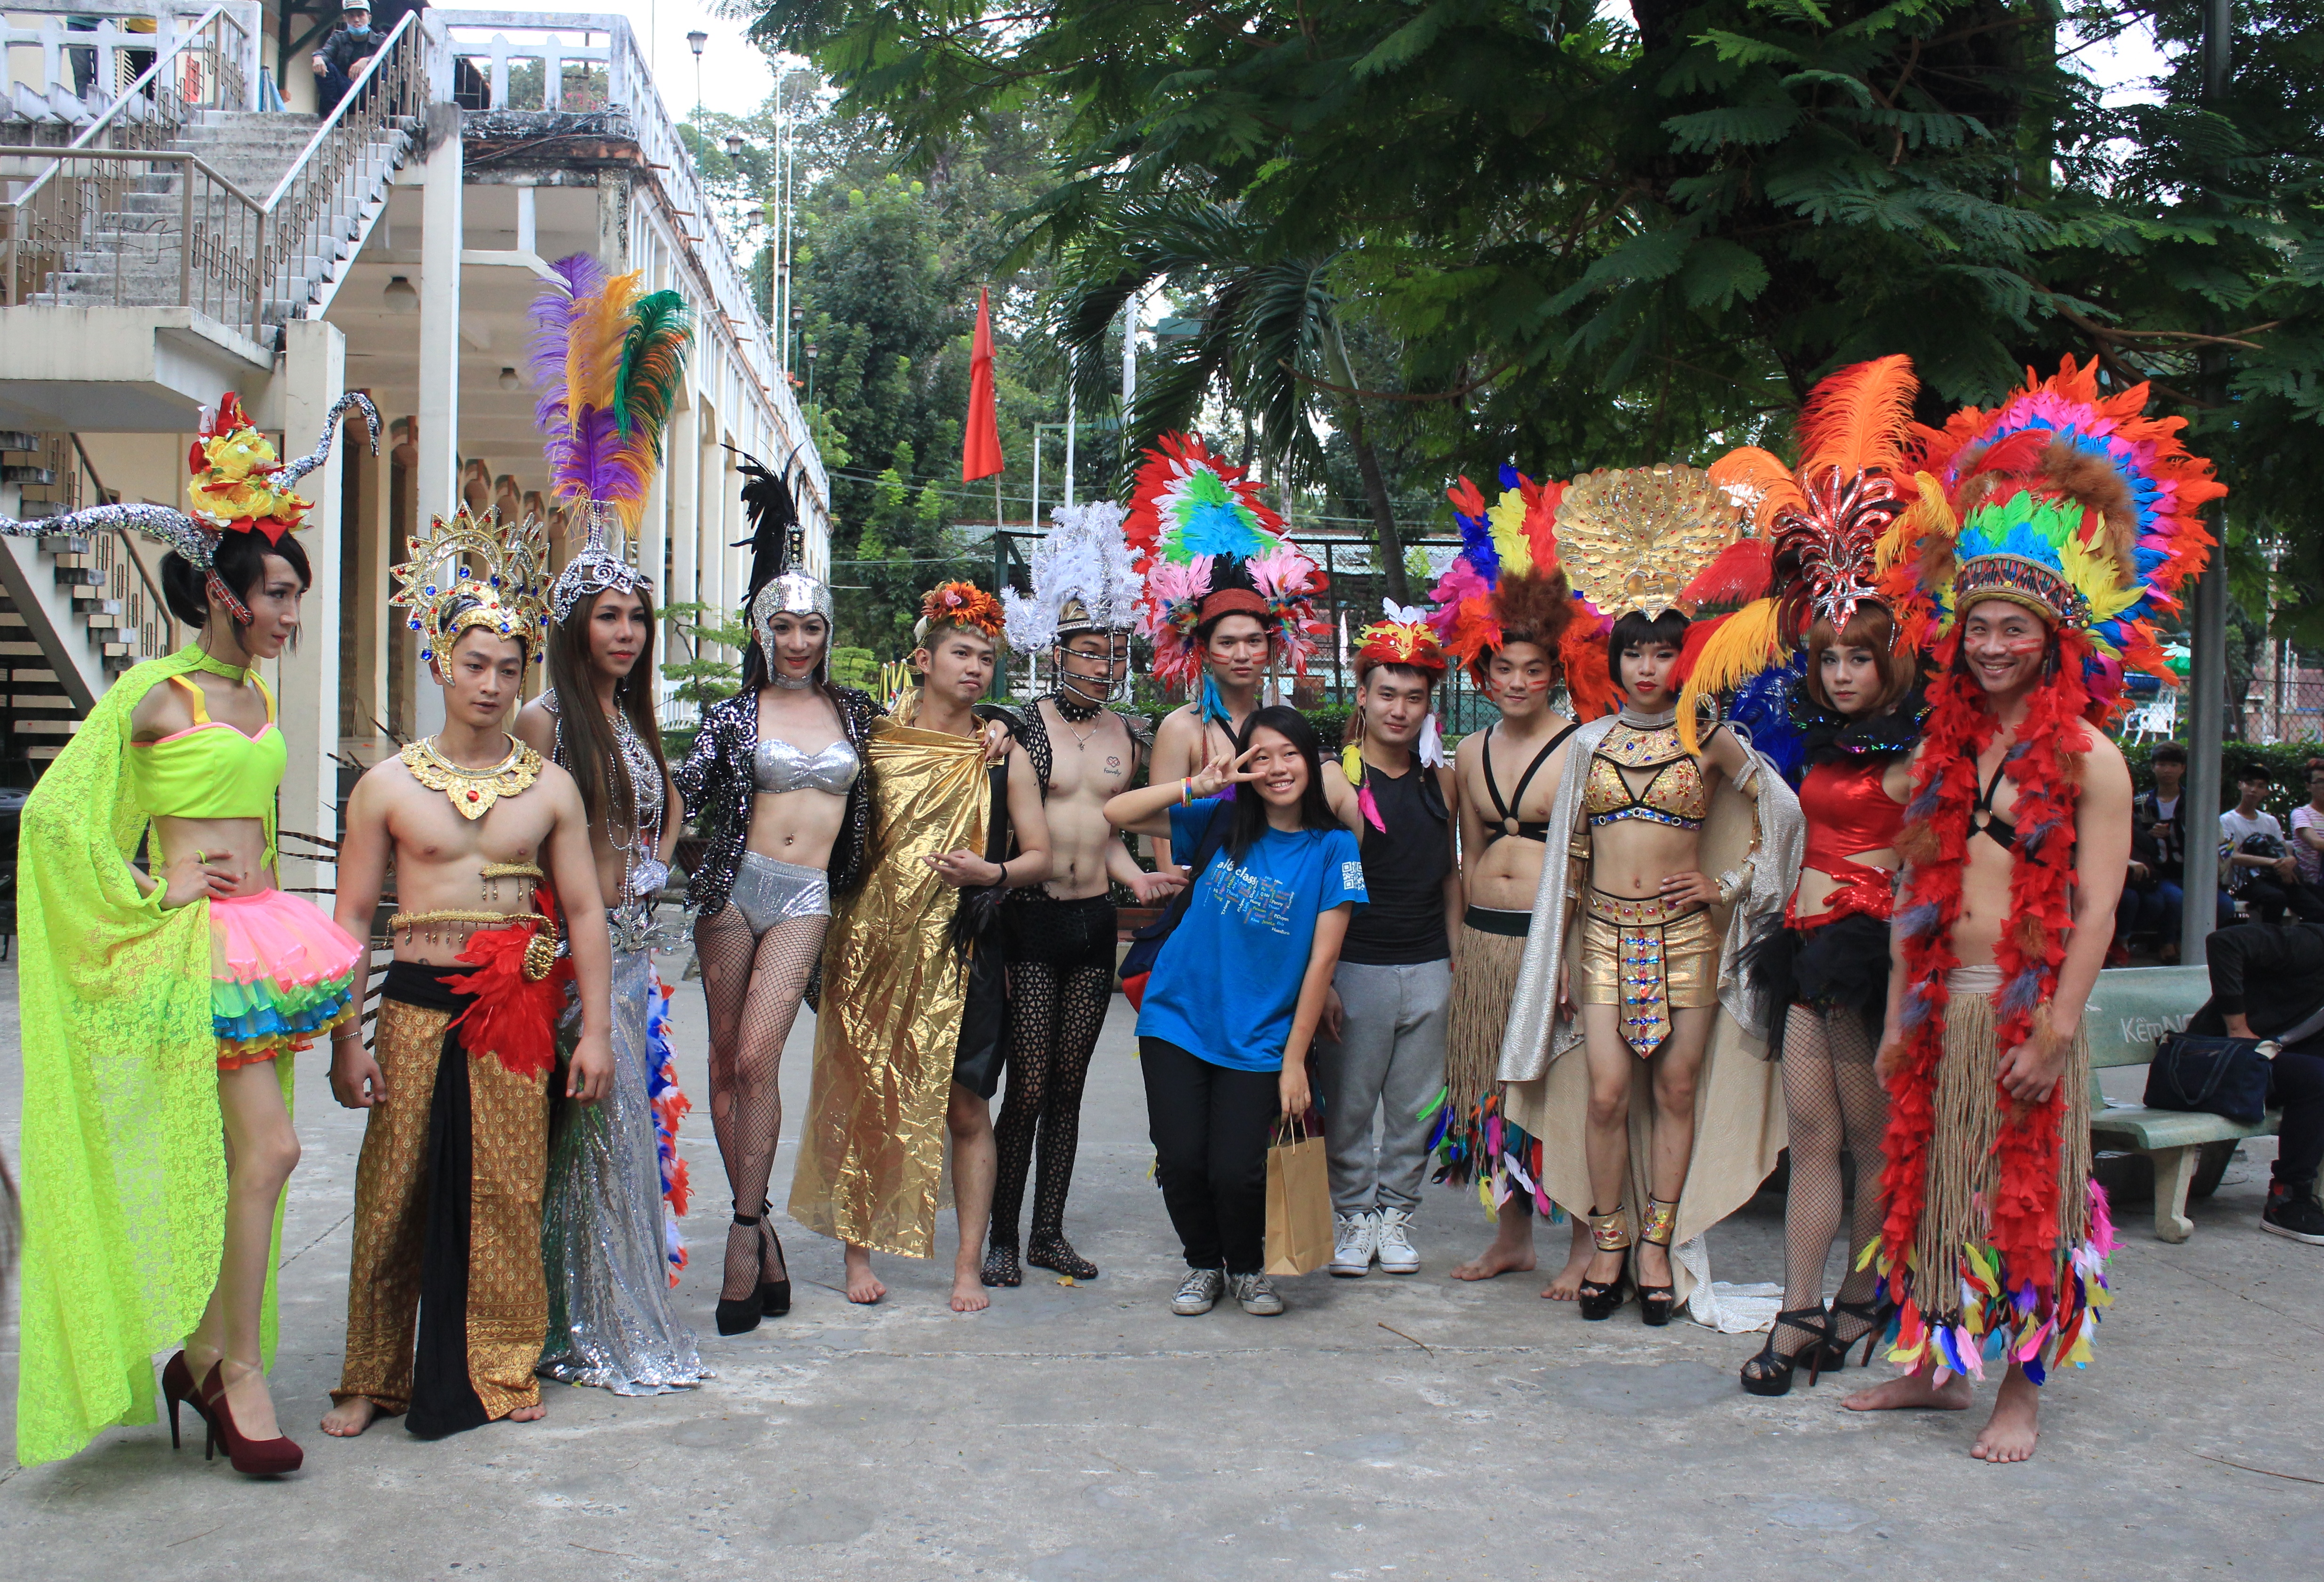 HCMC event honors LGBT community, attracts 1,000